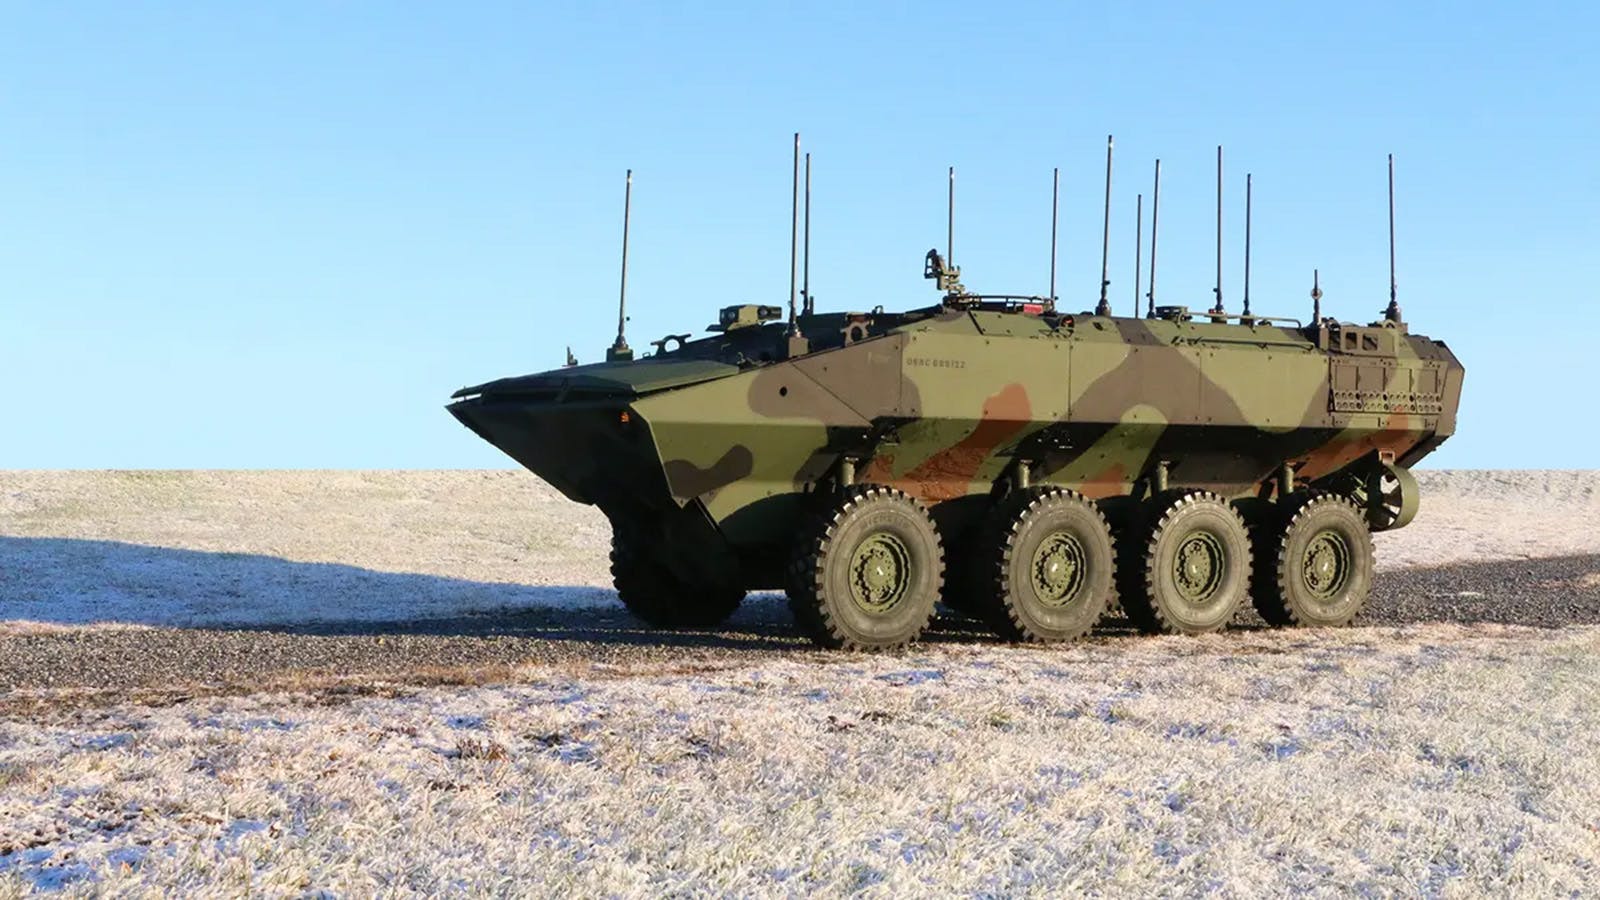 BAE delivers first ACV Command Variant to US Marine Corps